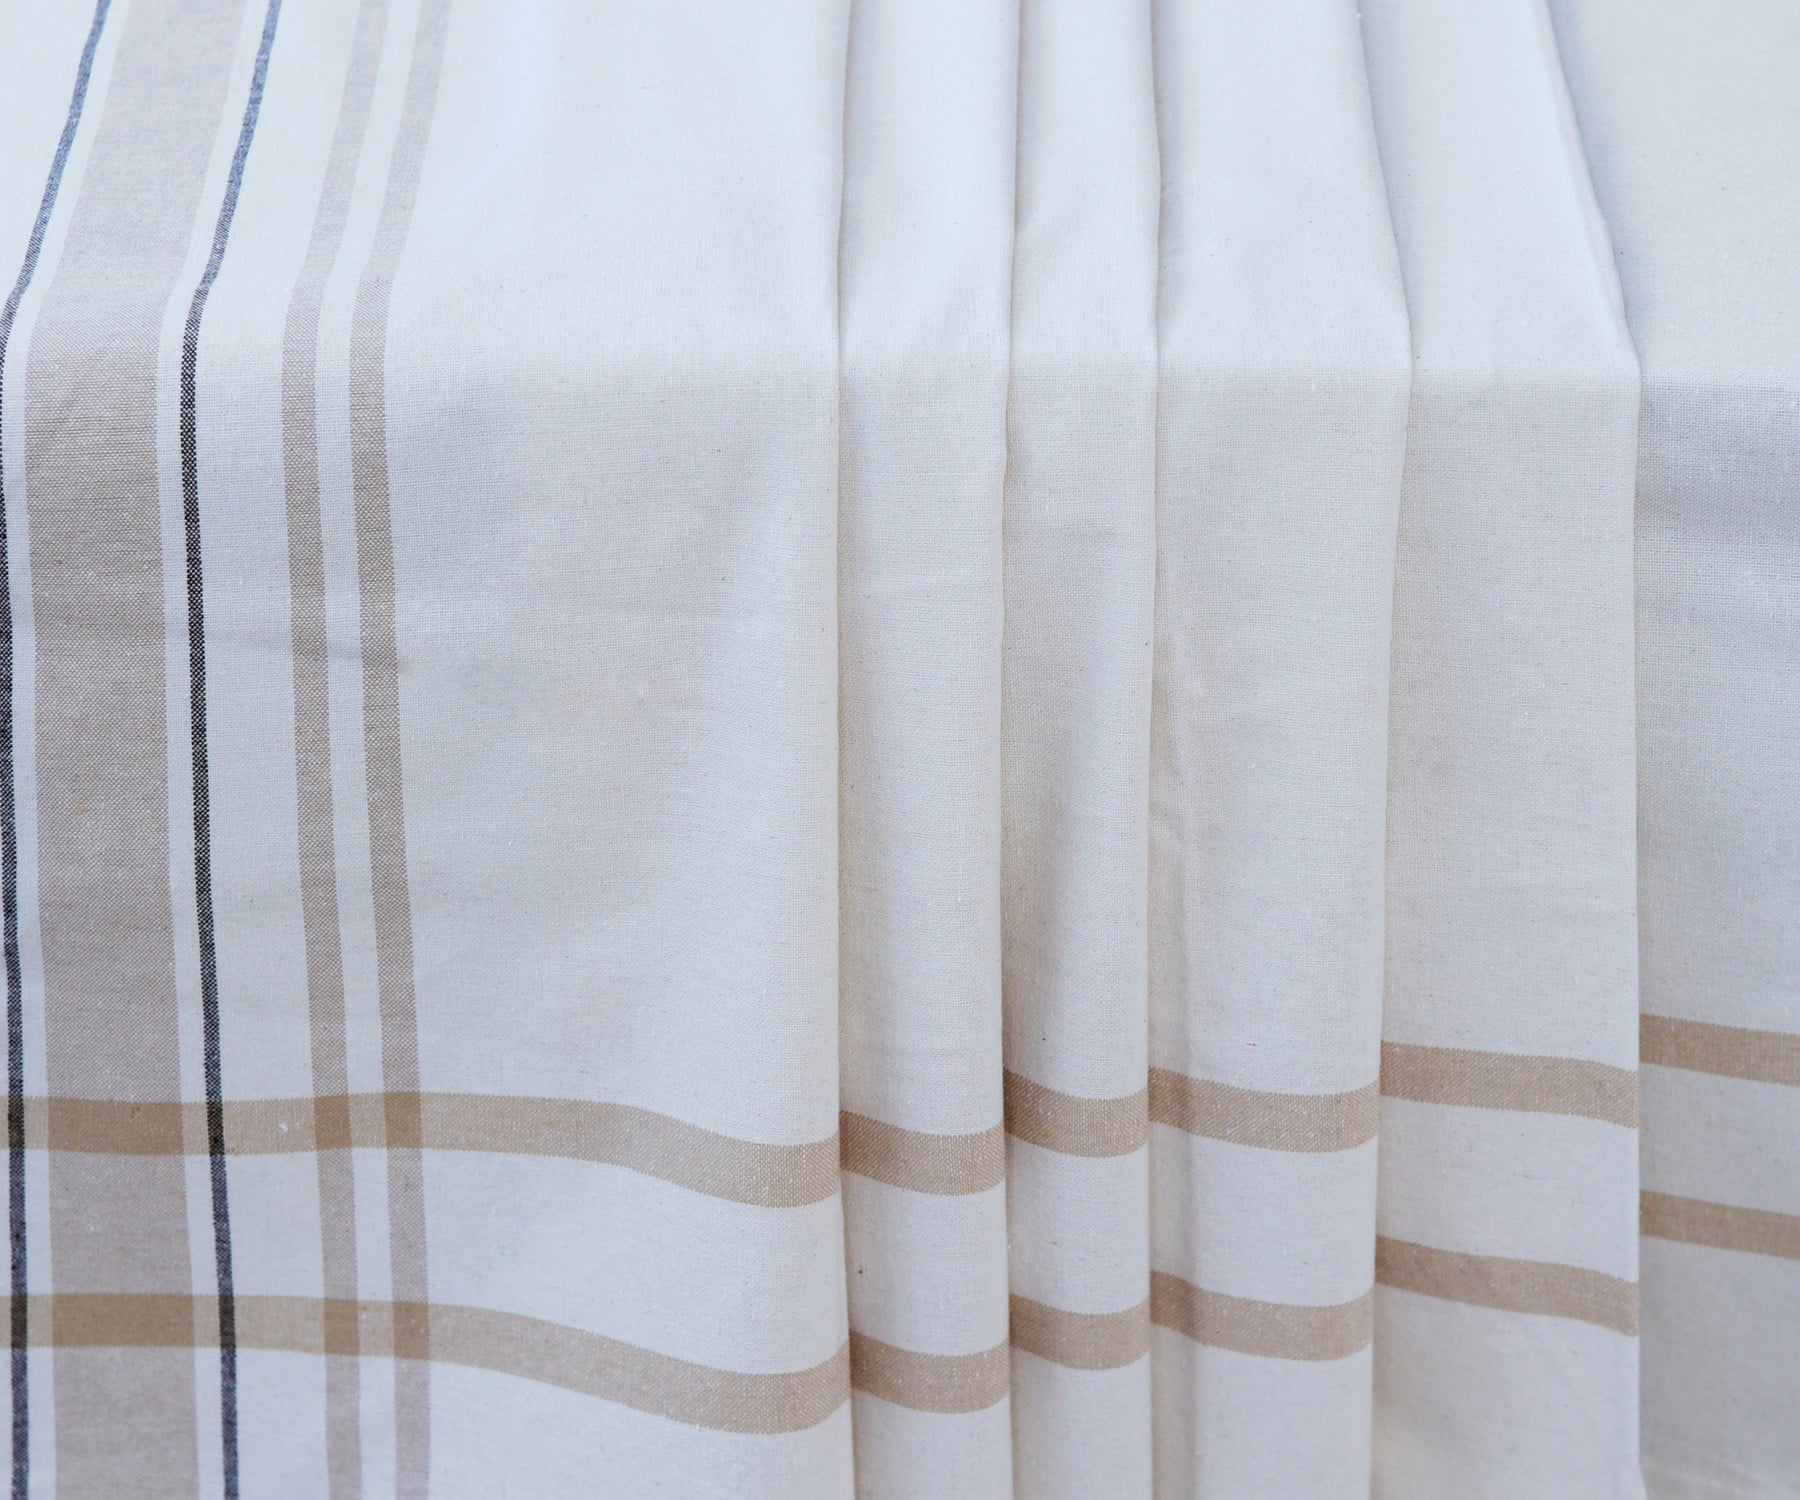 Elegant French tablecloth with white and brown stripes laid out on a table